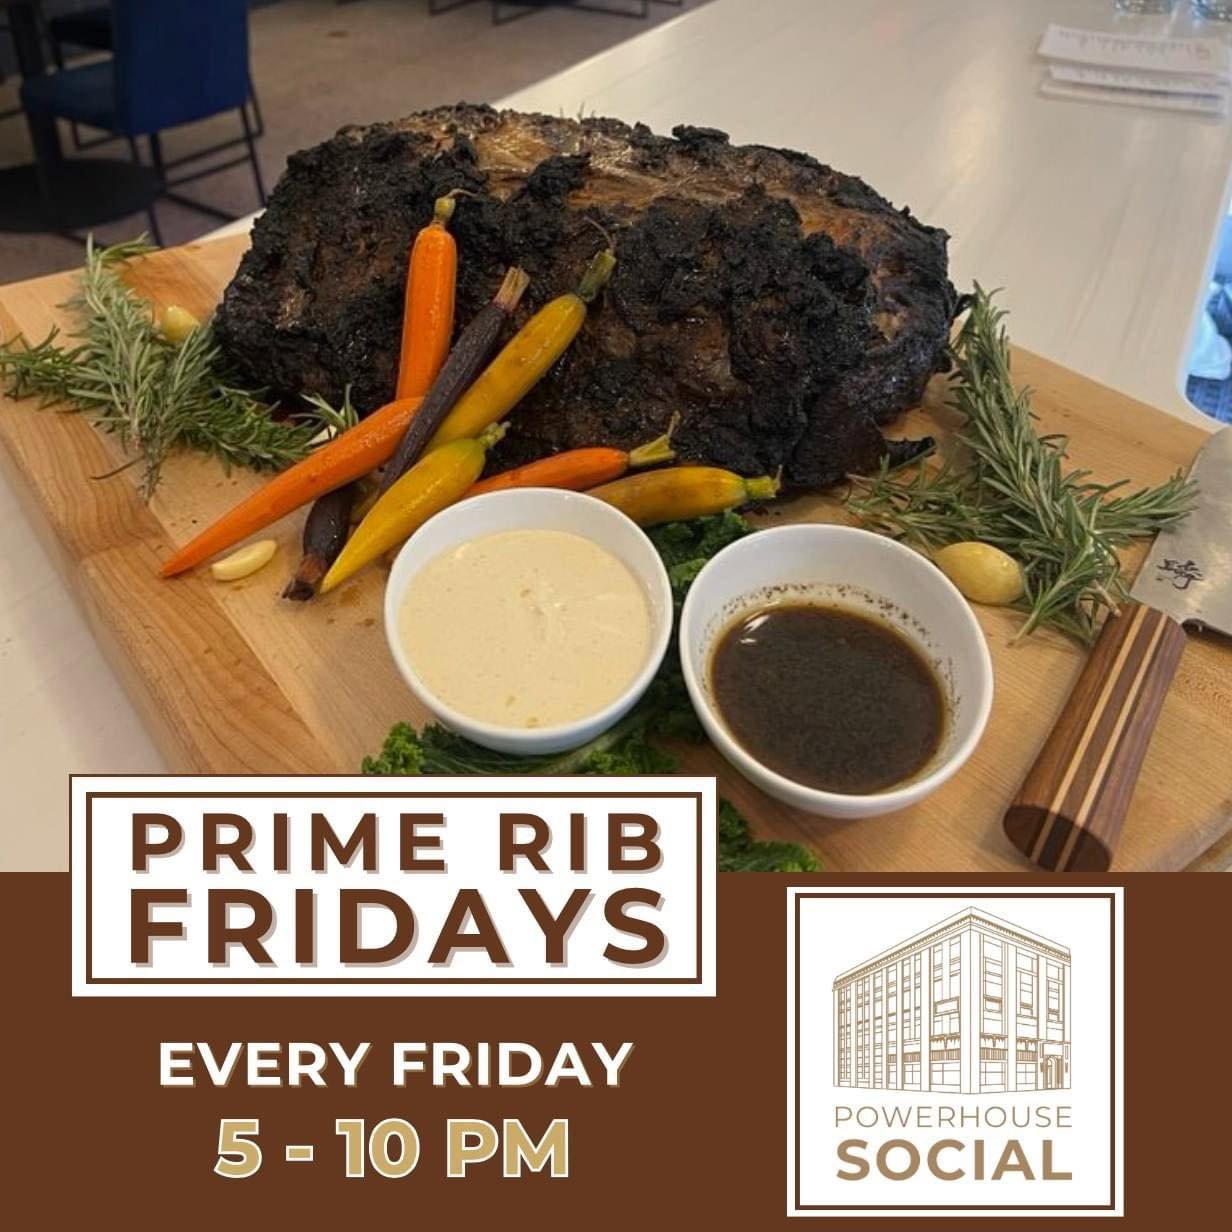 Dine at Powerhouse Social tonight for our signature prime rib event! 🌟 From 5-10 PM, savor the culinary delight of perfectly prepared prime rib. A memorable feast awaits! 🥩🍽️